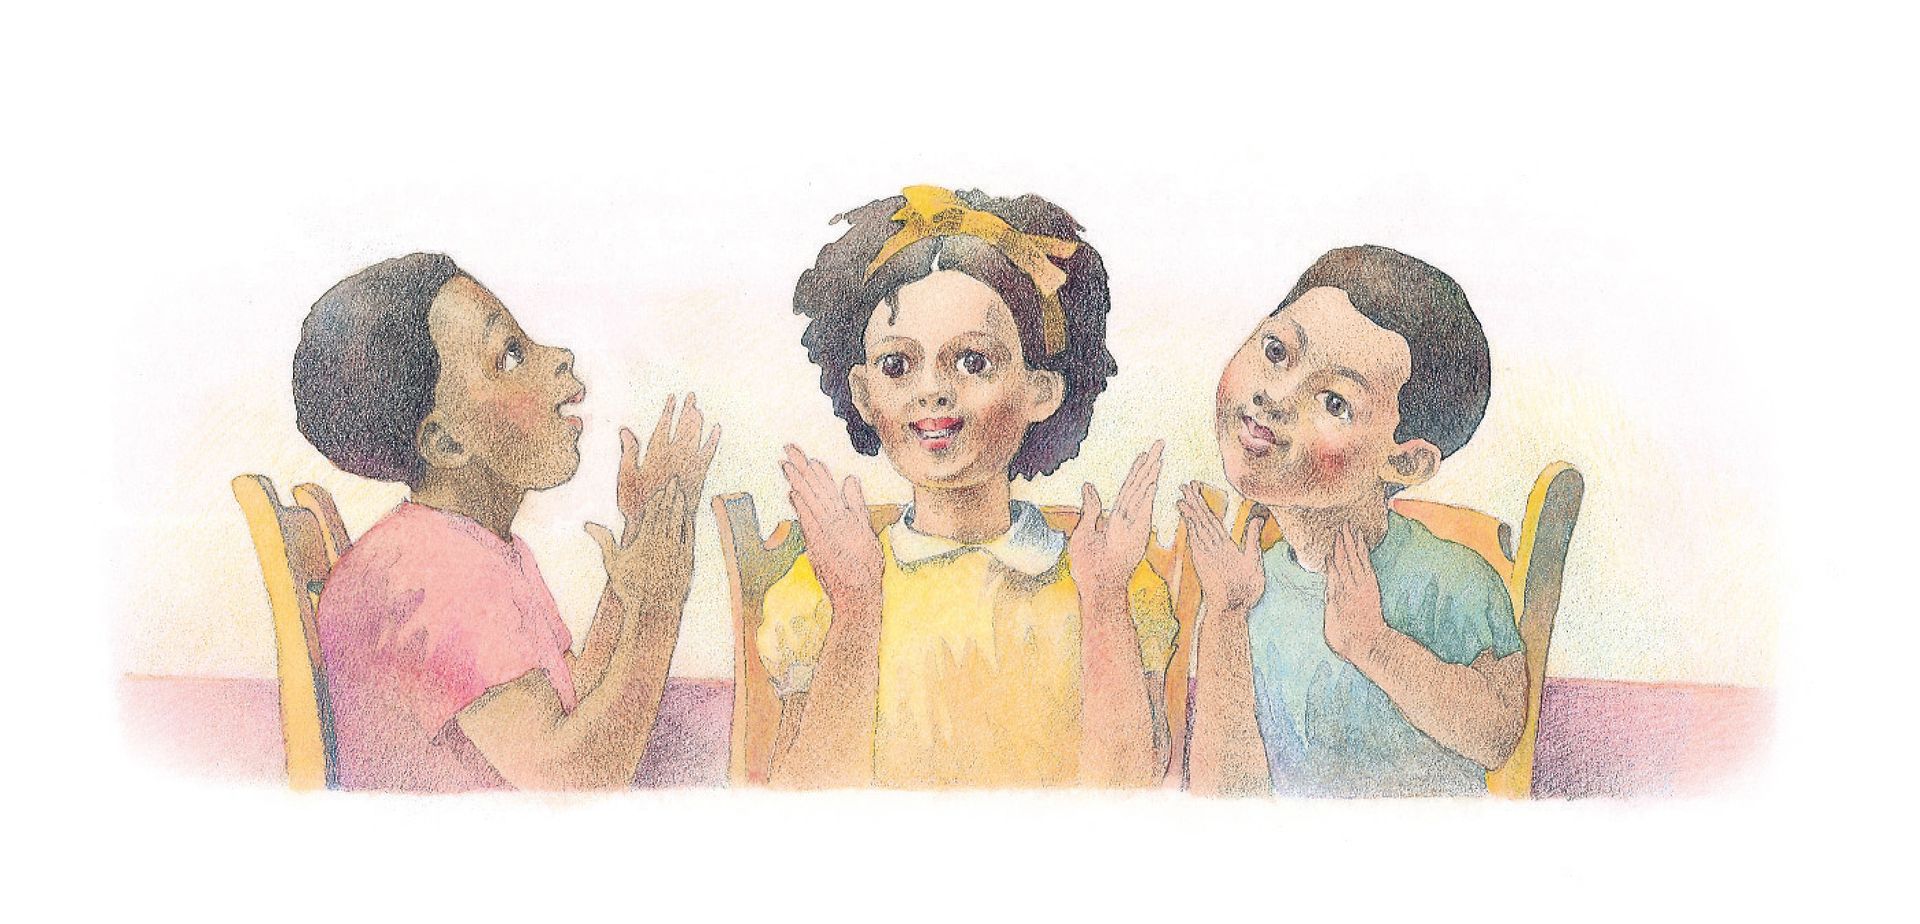 Three children clap and sing together. From the Children’s Songbook, page 266, “If You’re Happy”; watercolor illustration by Richard Hull.